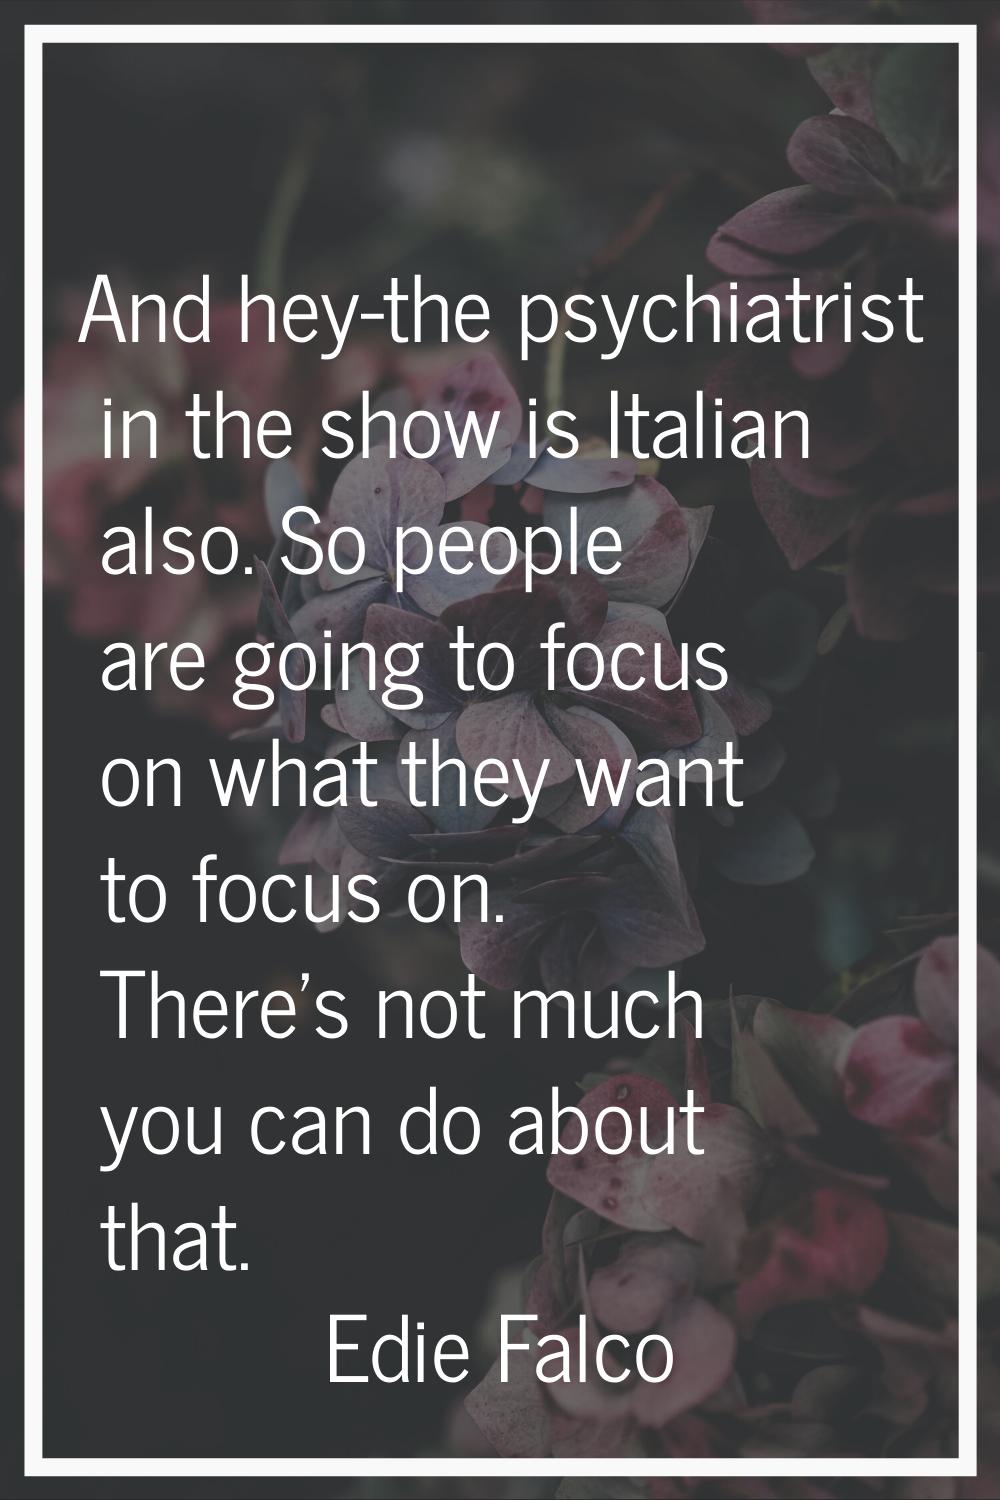 And hey-the psychiatrist in the show is Italian also. So people are going to focus on what they wan